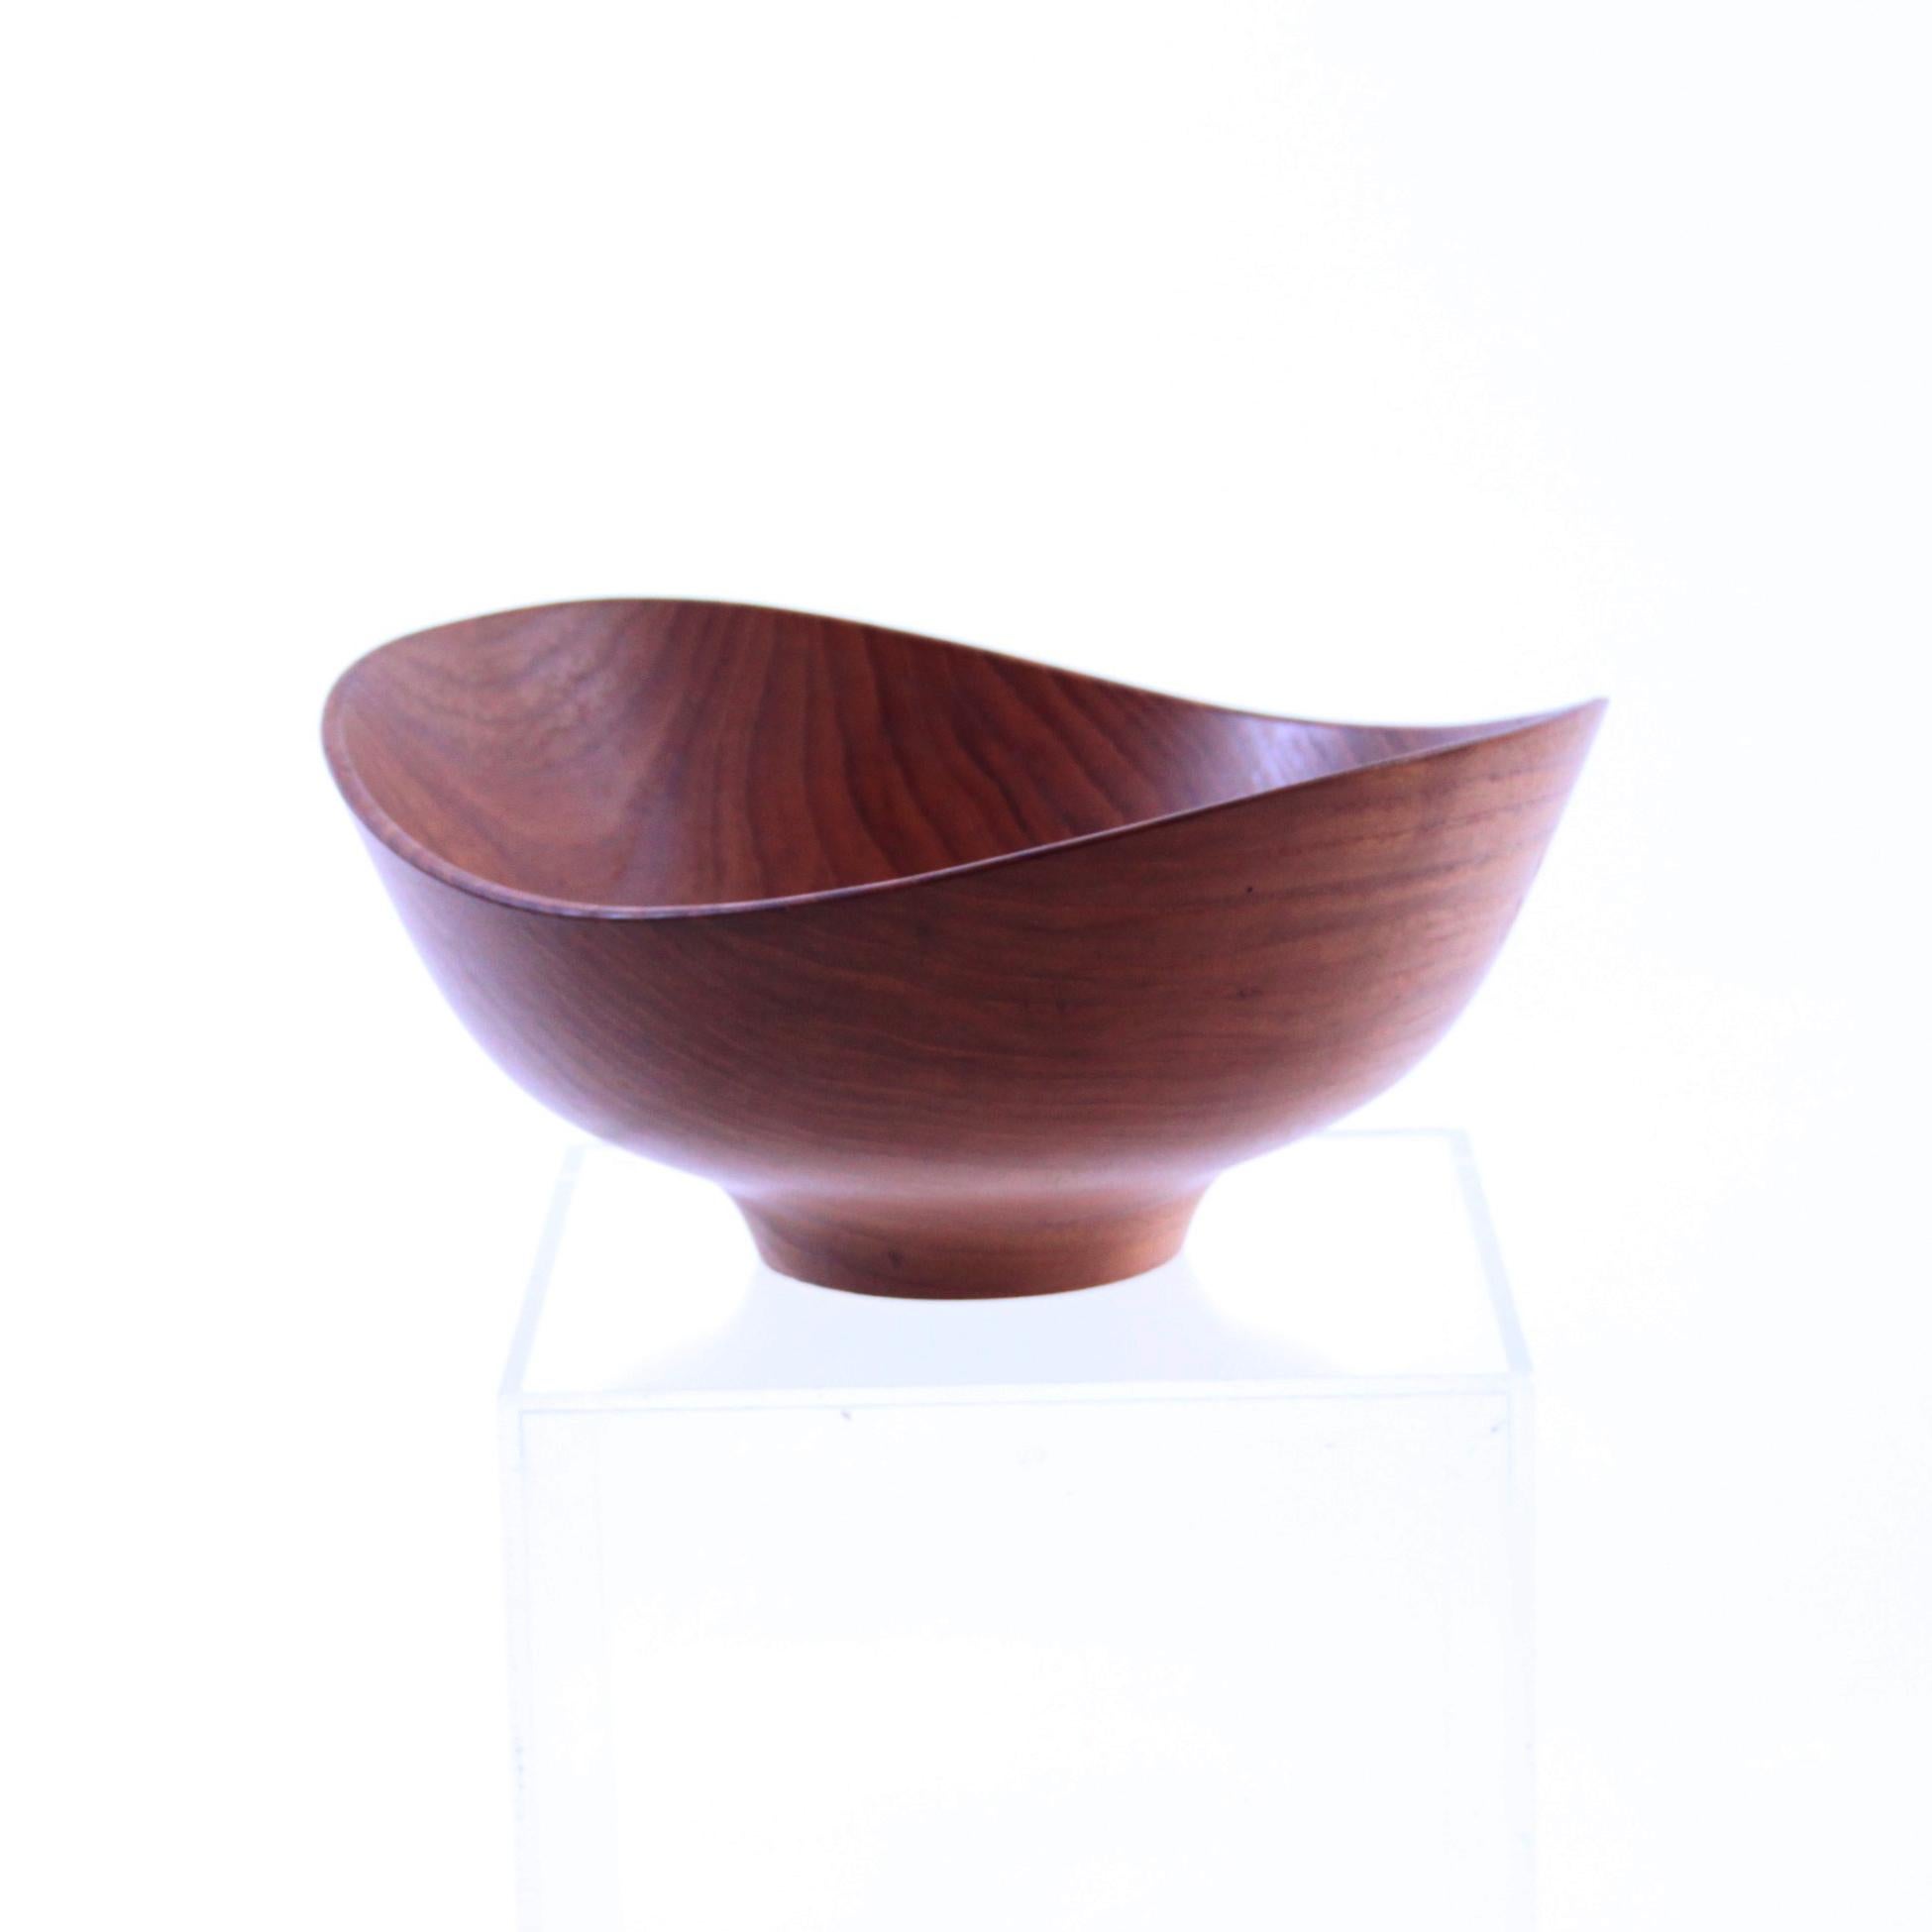 Finn Juhl & Kay Bojesen, Mid-Century Modern design

A sculptural bowl made from one piece of turned teak.

Designed by Finn Juhl and manufactured by Kay Bojesens workshop.

Impressed with manufacturer's mark to underside.

Collector's